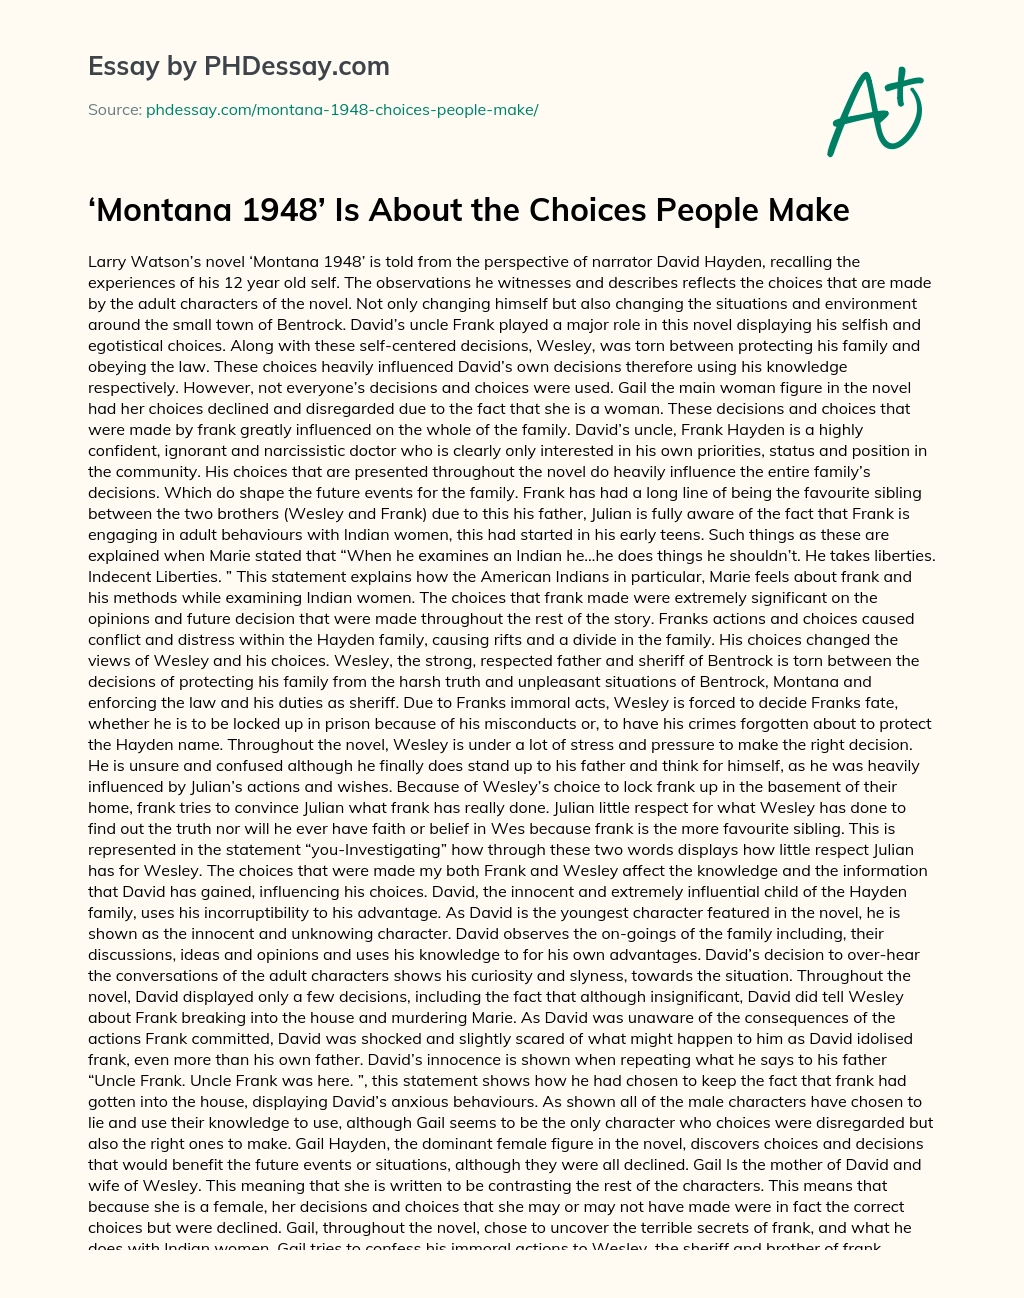 Montana 1948 Is About the Choices People Make essay